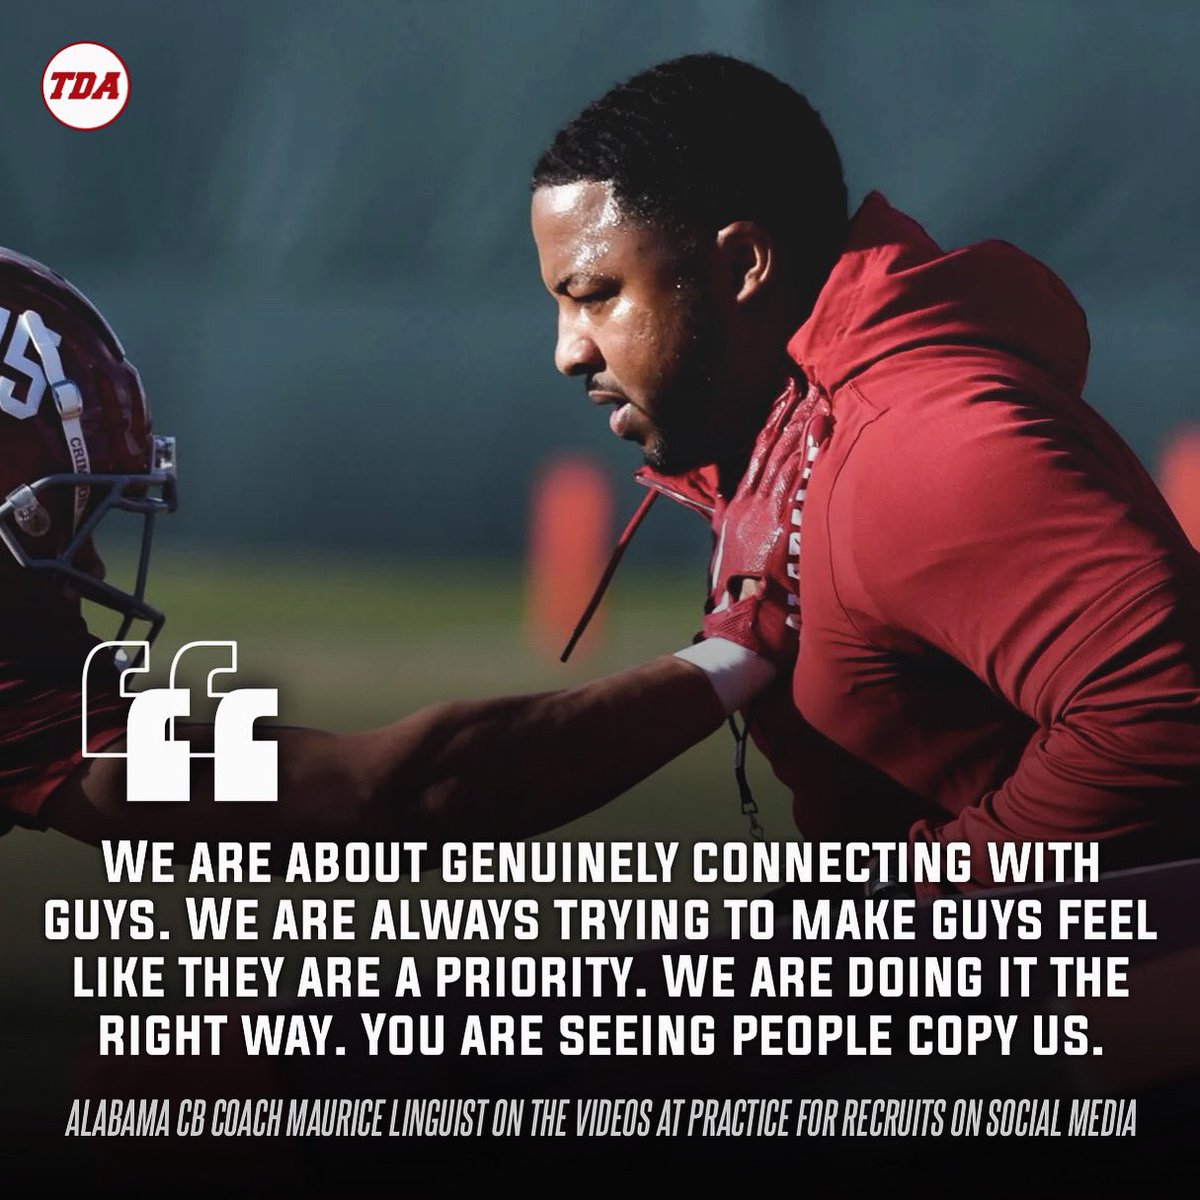 Alabama CB coach Maurice Linguist talks the strategy behind coaches sending personalized videos to recruits during spring practices.